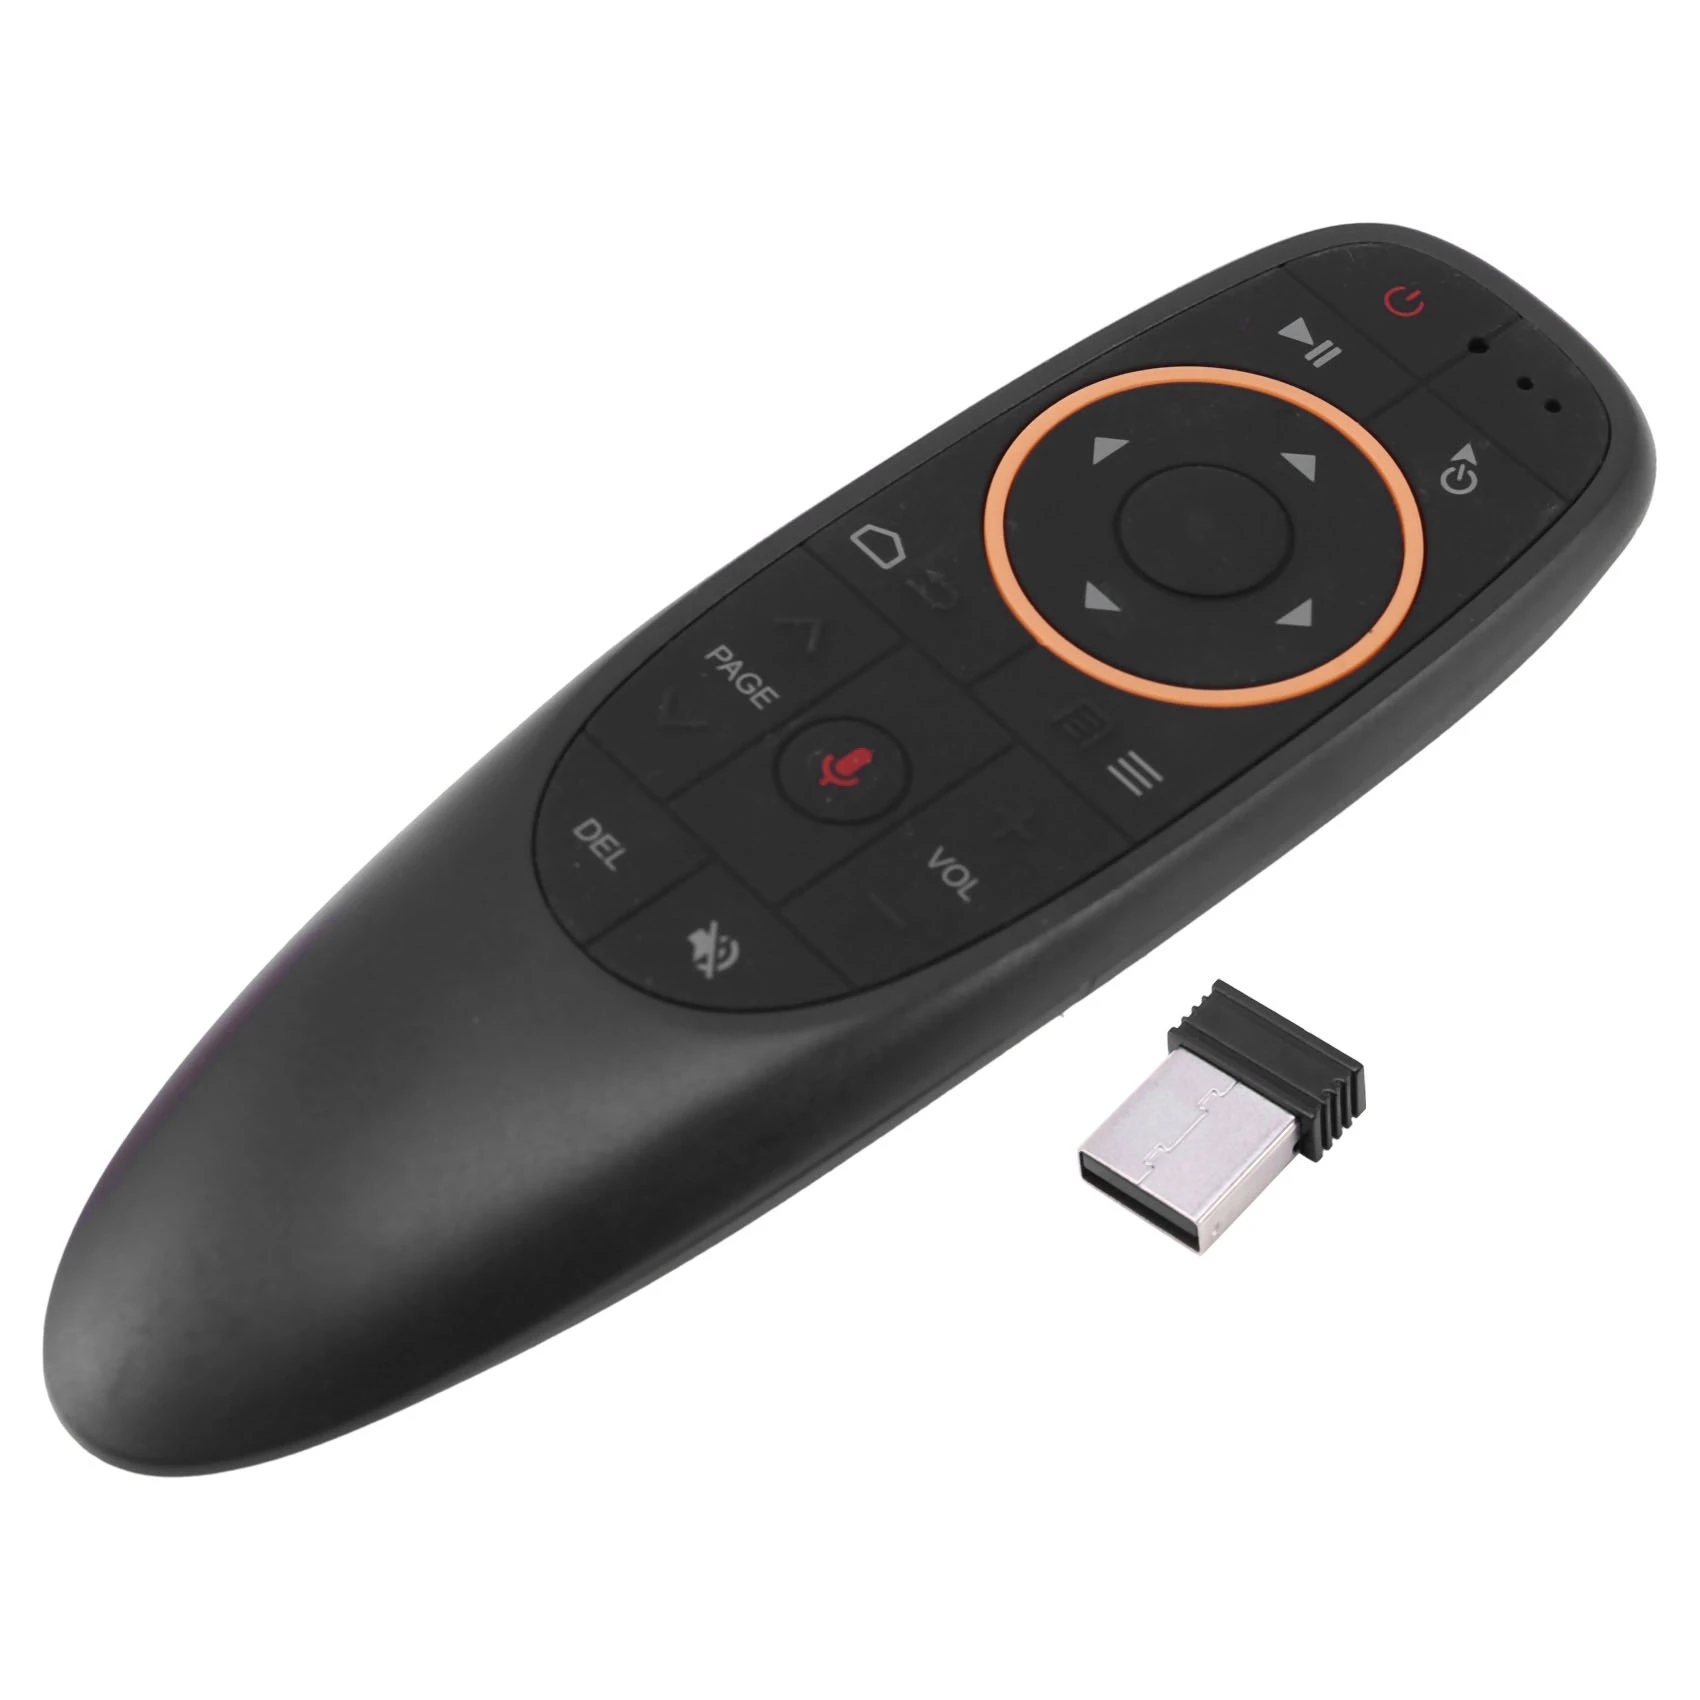 

G10 Voice Air Mouse Remote, 2.4Ghz Mini Wireless Android TV Control & Infrared Learning Microphone for Computer PC Android